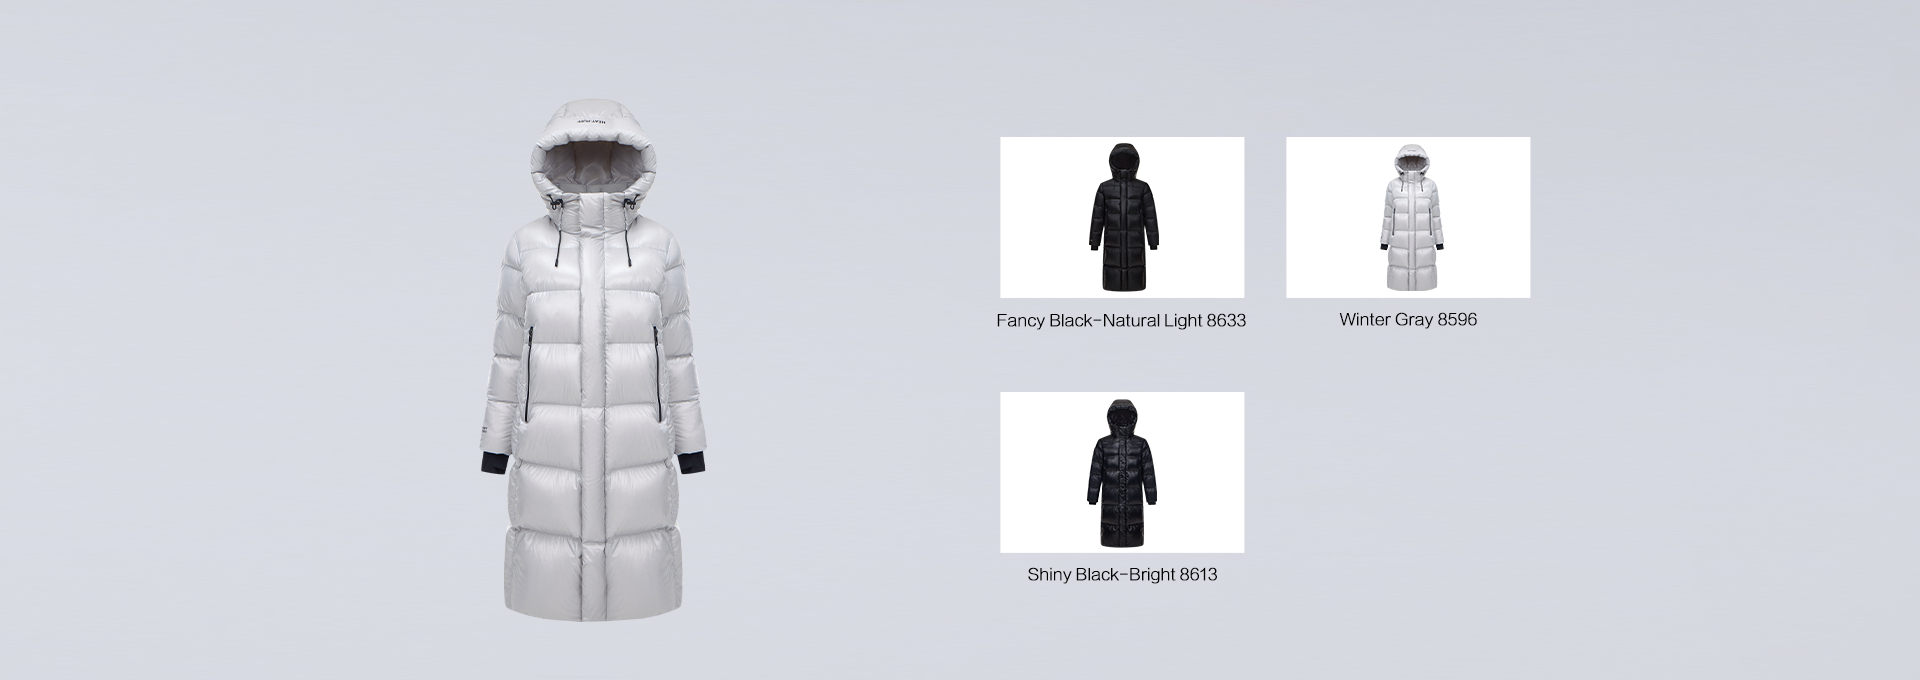 PUFF DOWN JACKET COLLECTION